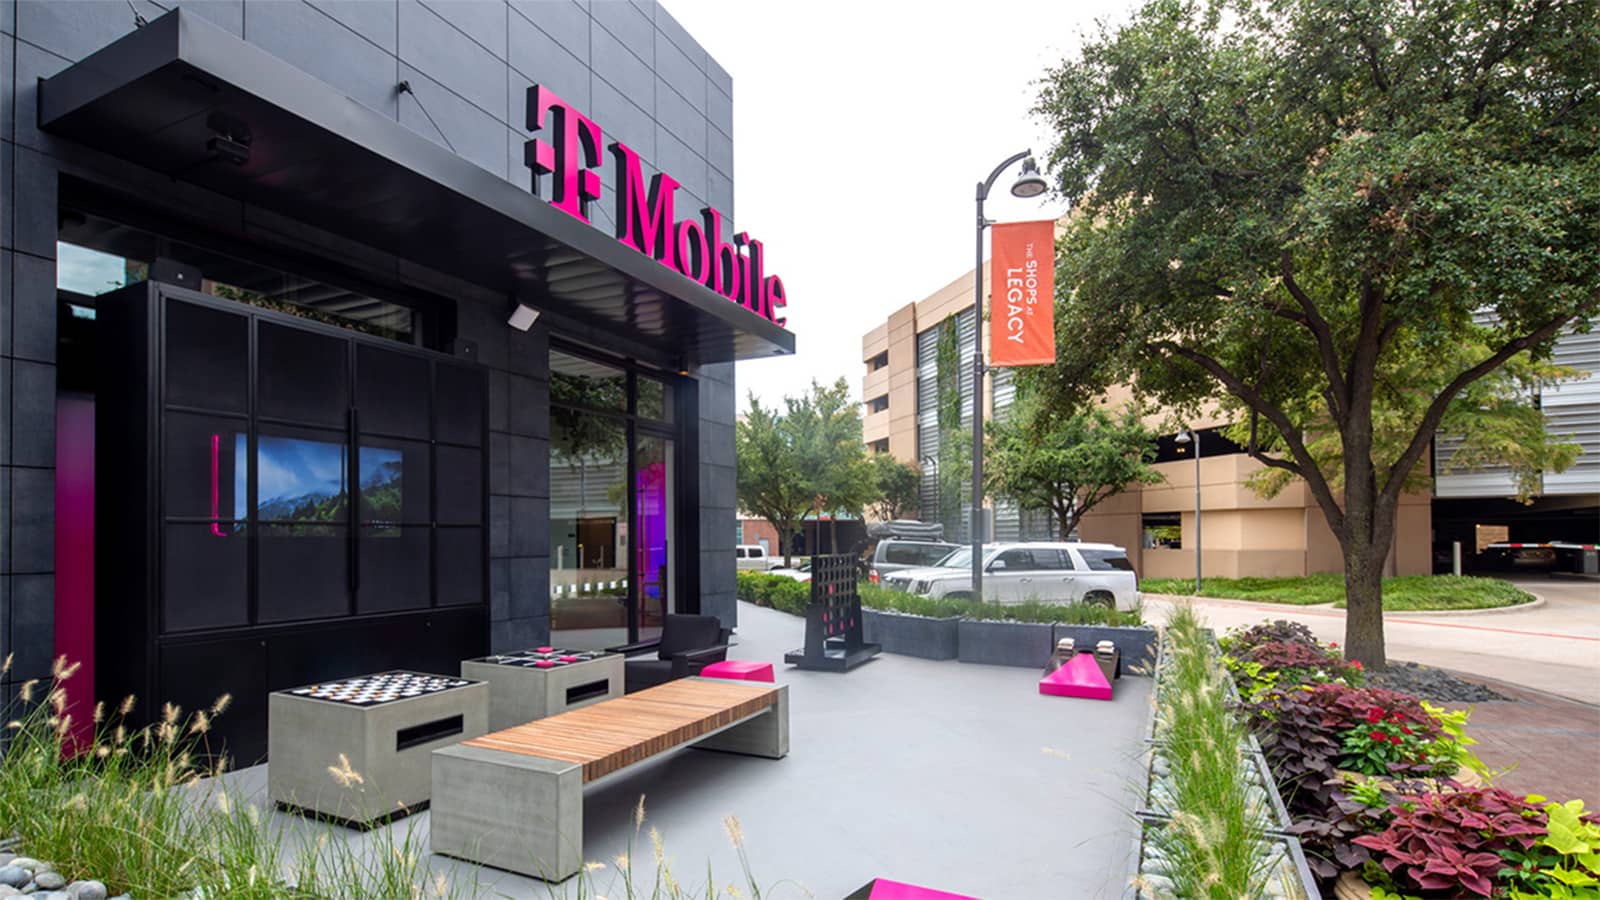 Each t-mobile location is approximately 10,000 square feet